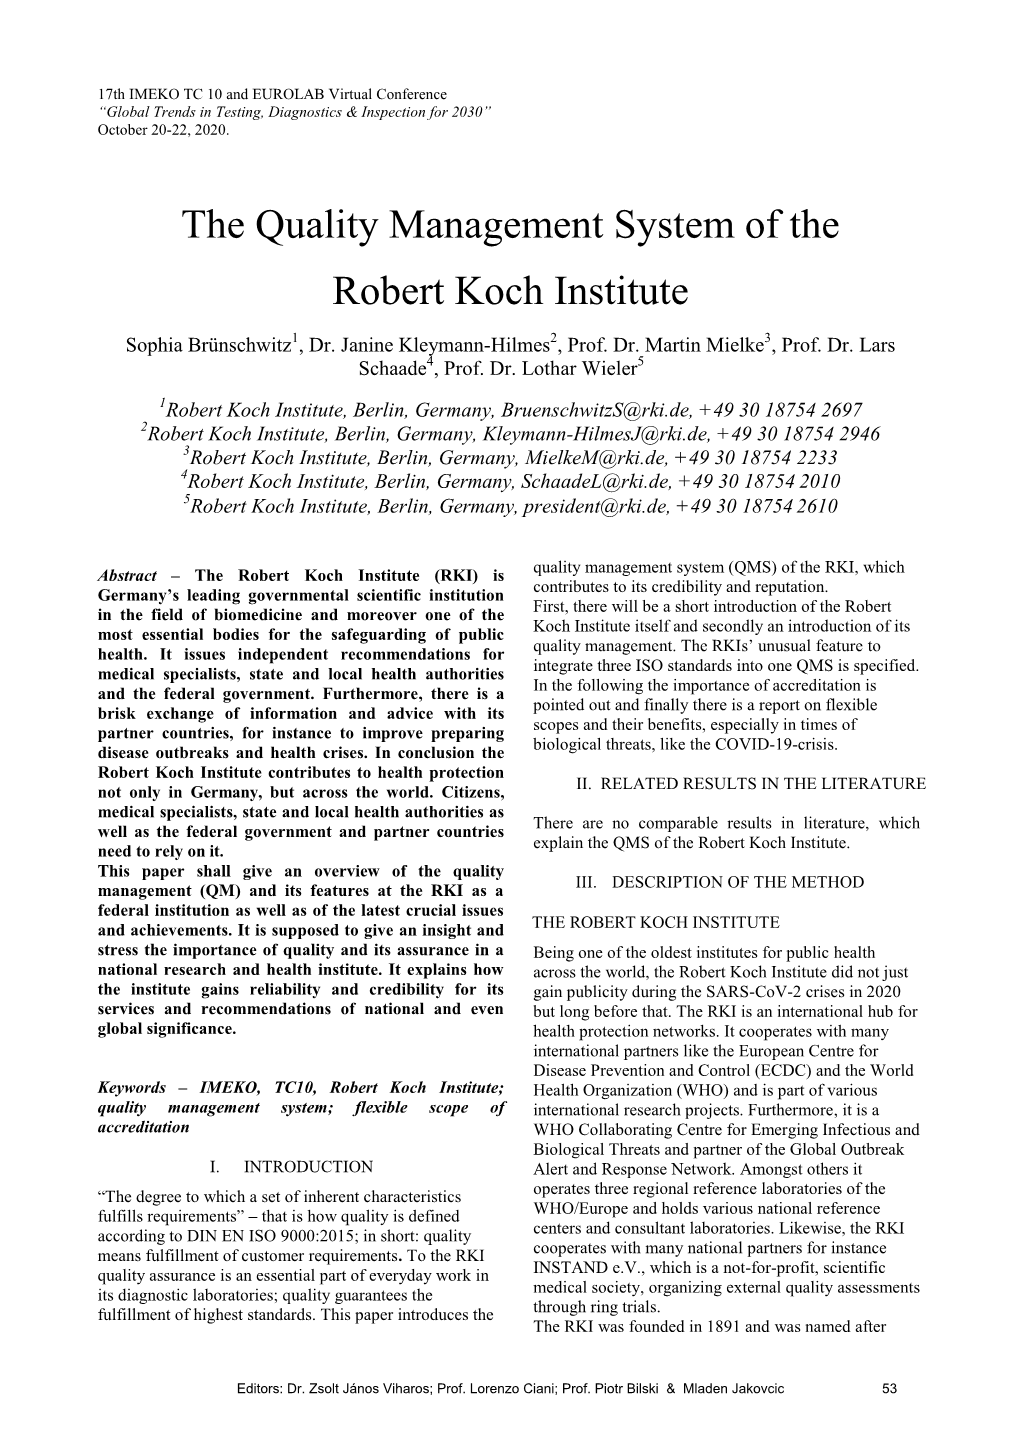 The Quality Management System of the Robert Koch Institute